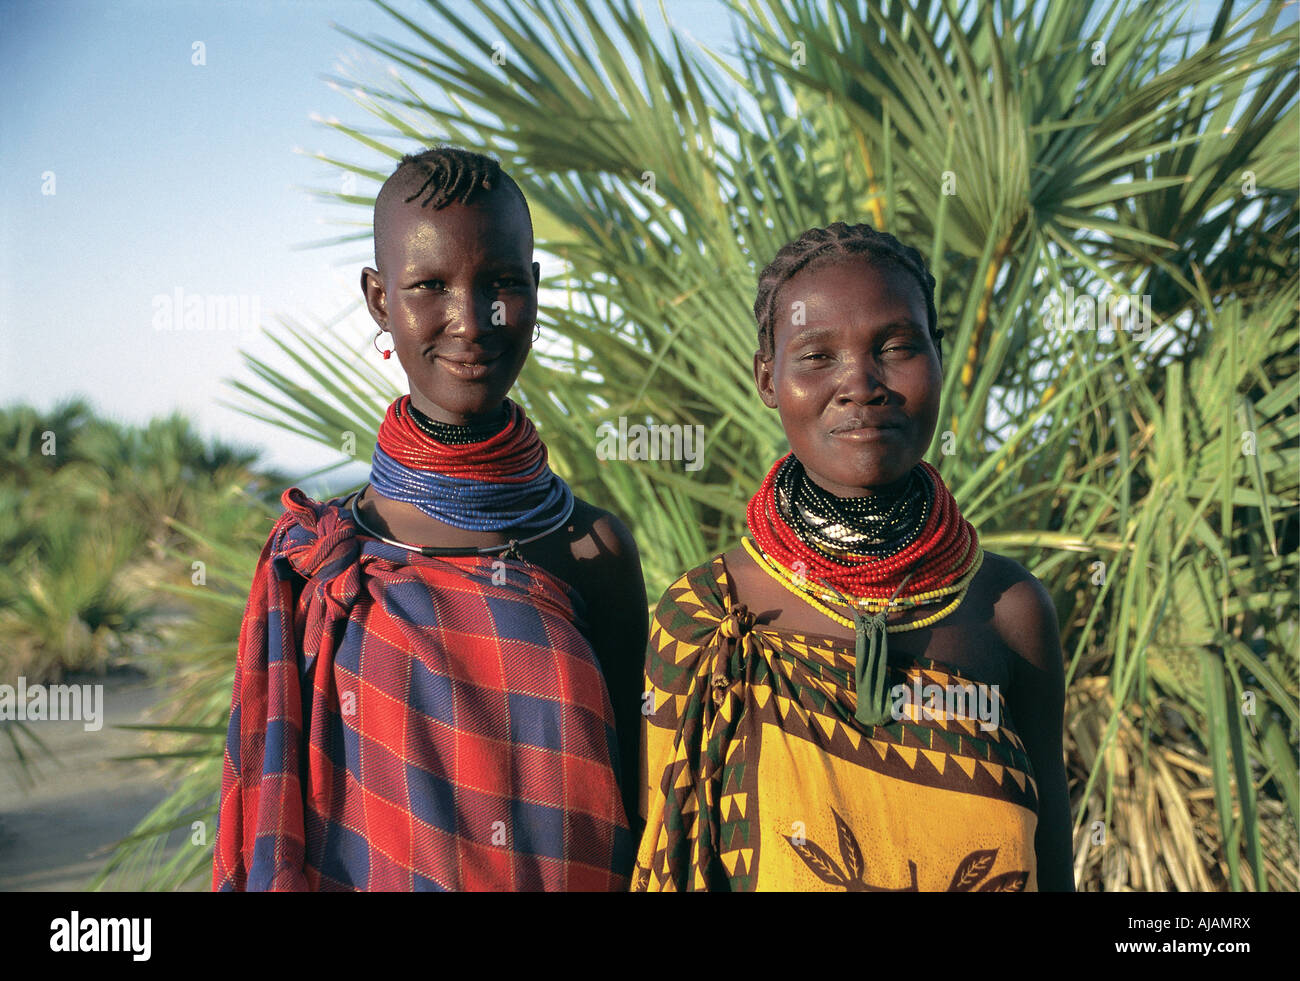 Portrait of two 2 traditional Turkana women Northern Kenya East Africa They are both smiling with friednly expressions Stock Photo